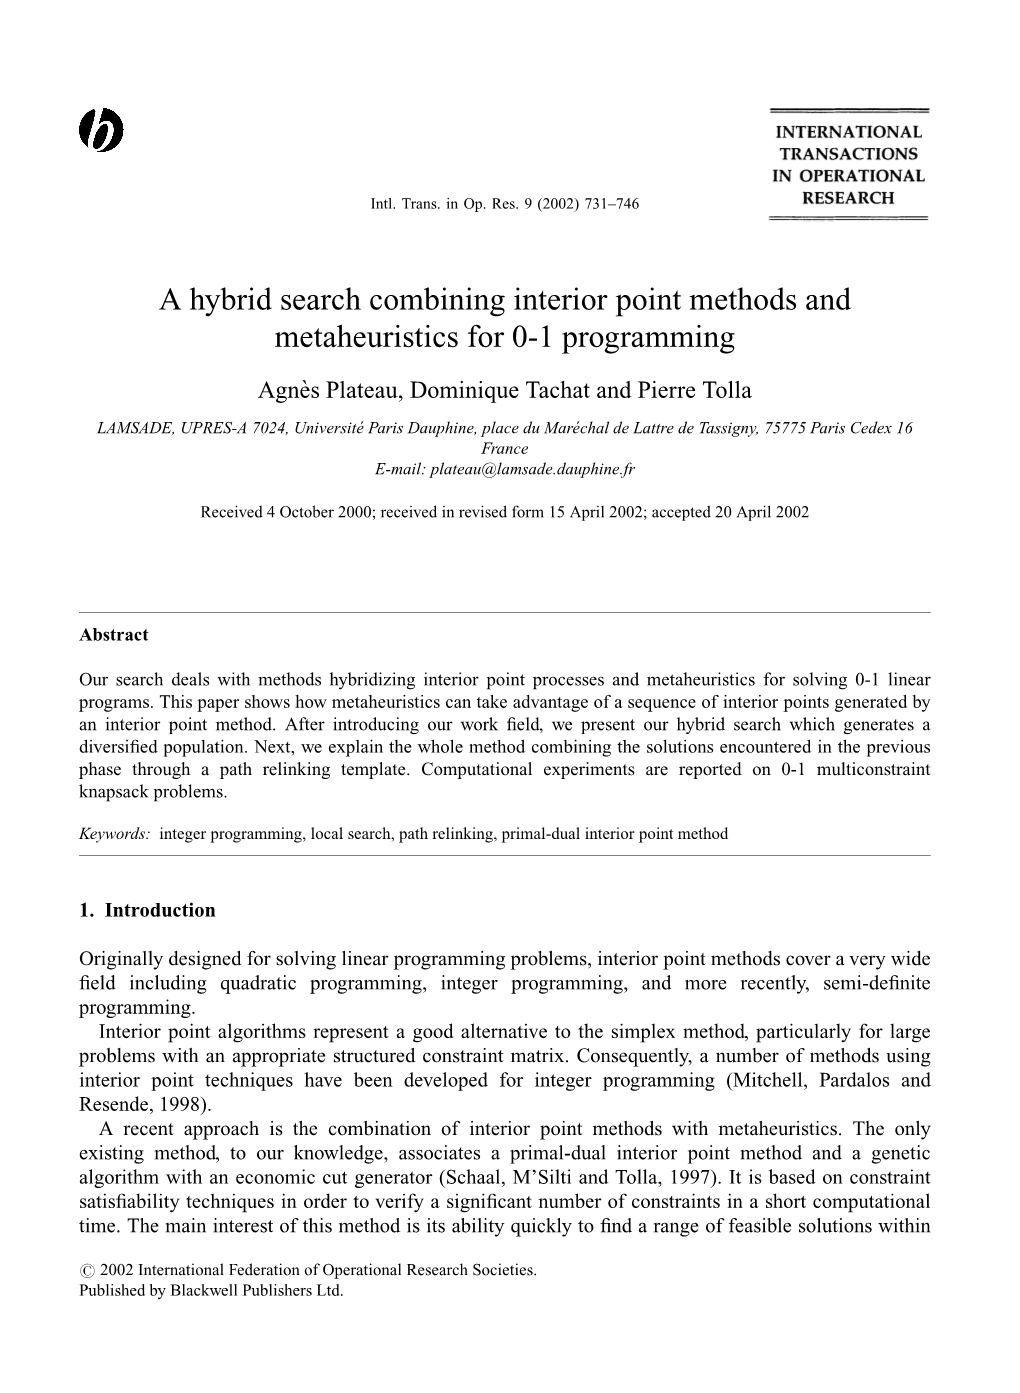 A Hybrid Search Combining Interior Point Methods and Metaheuristics for 0-1 Programming